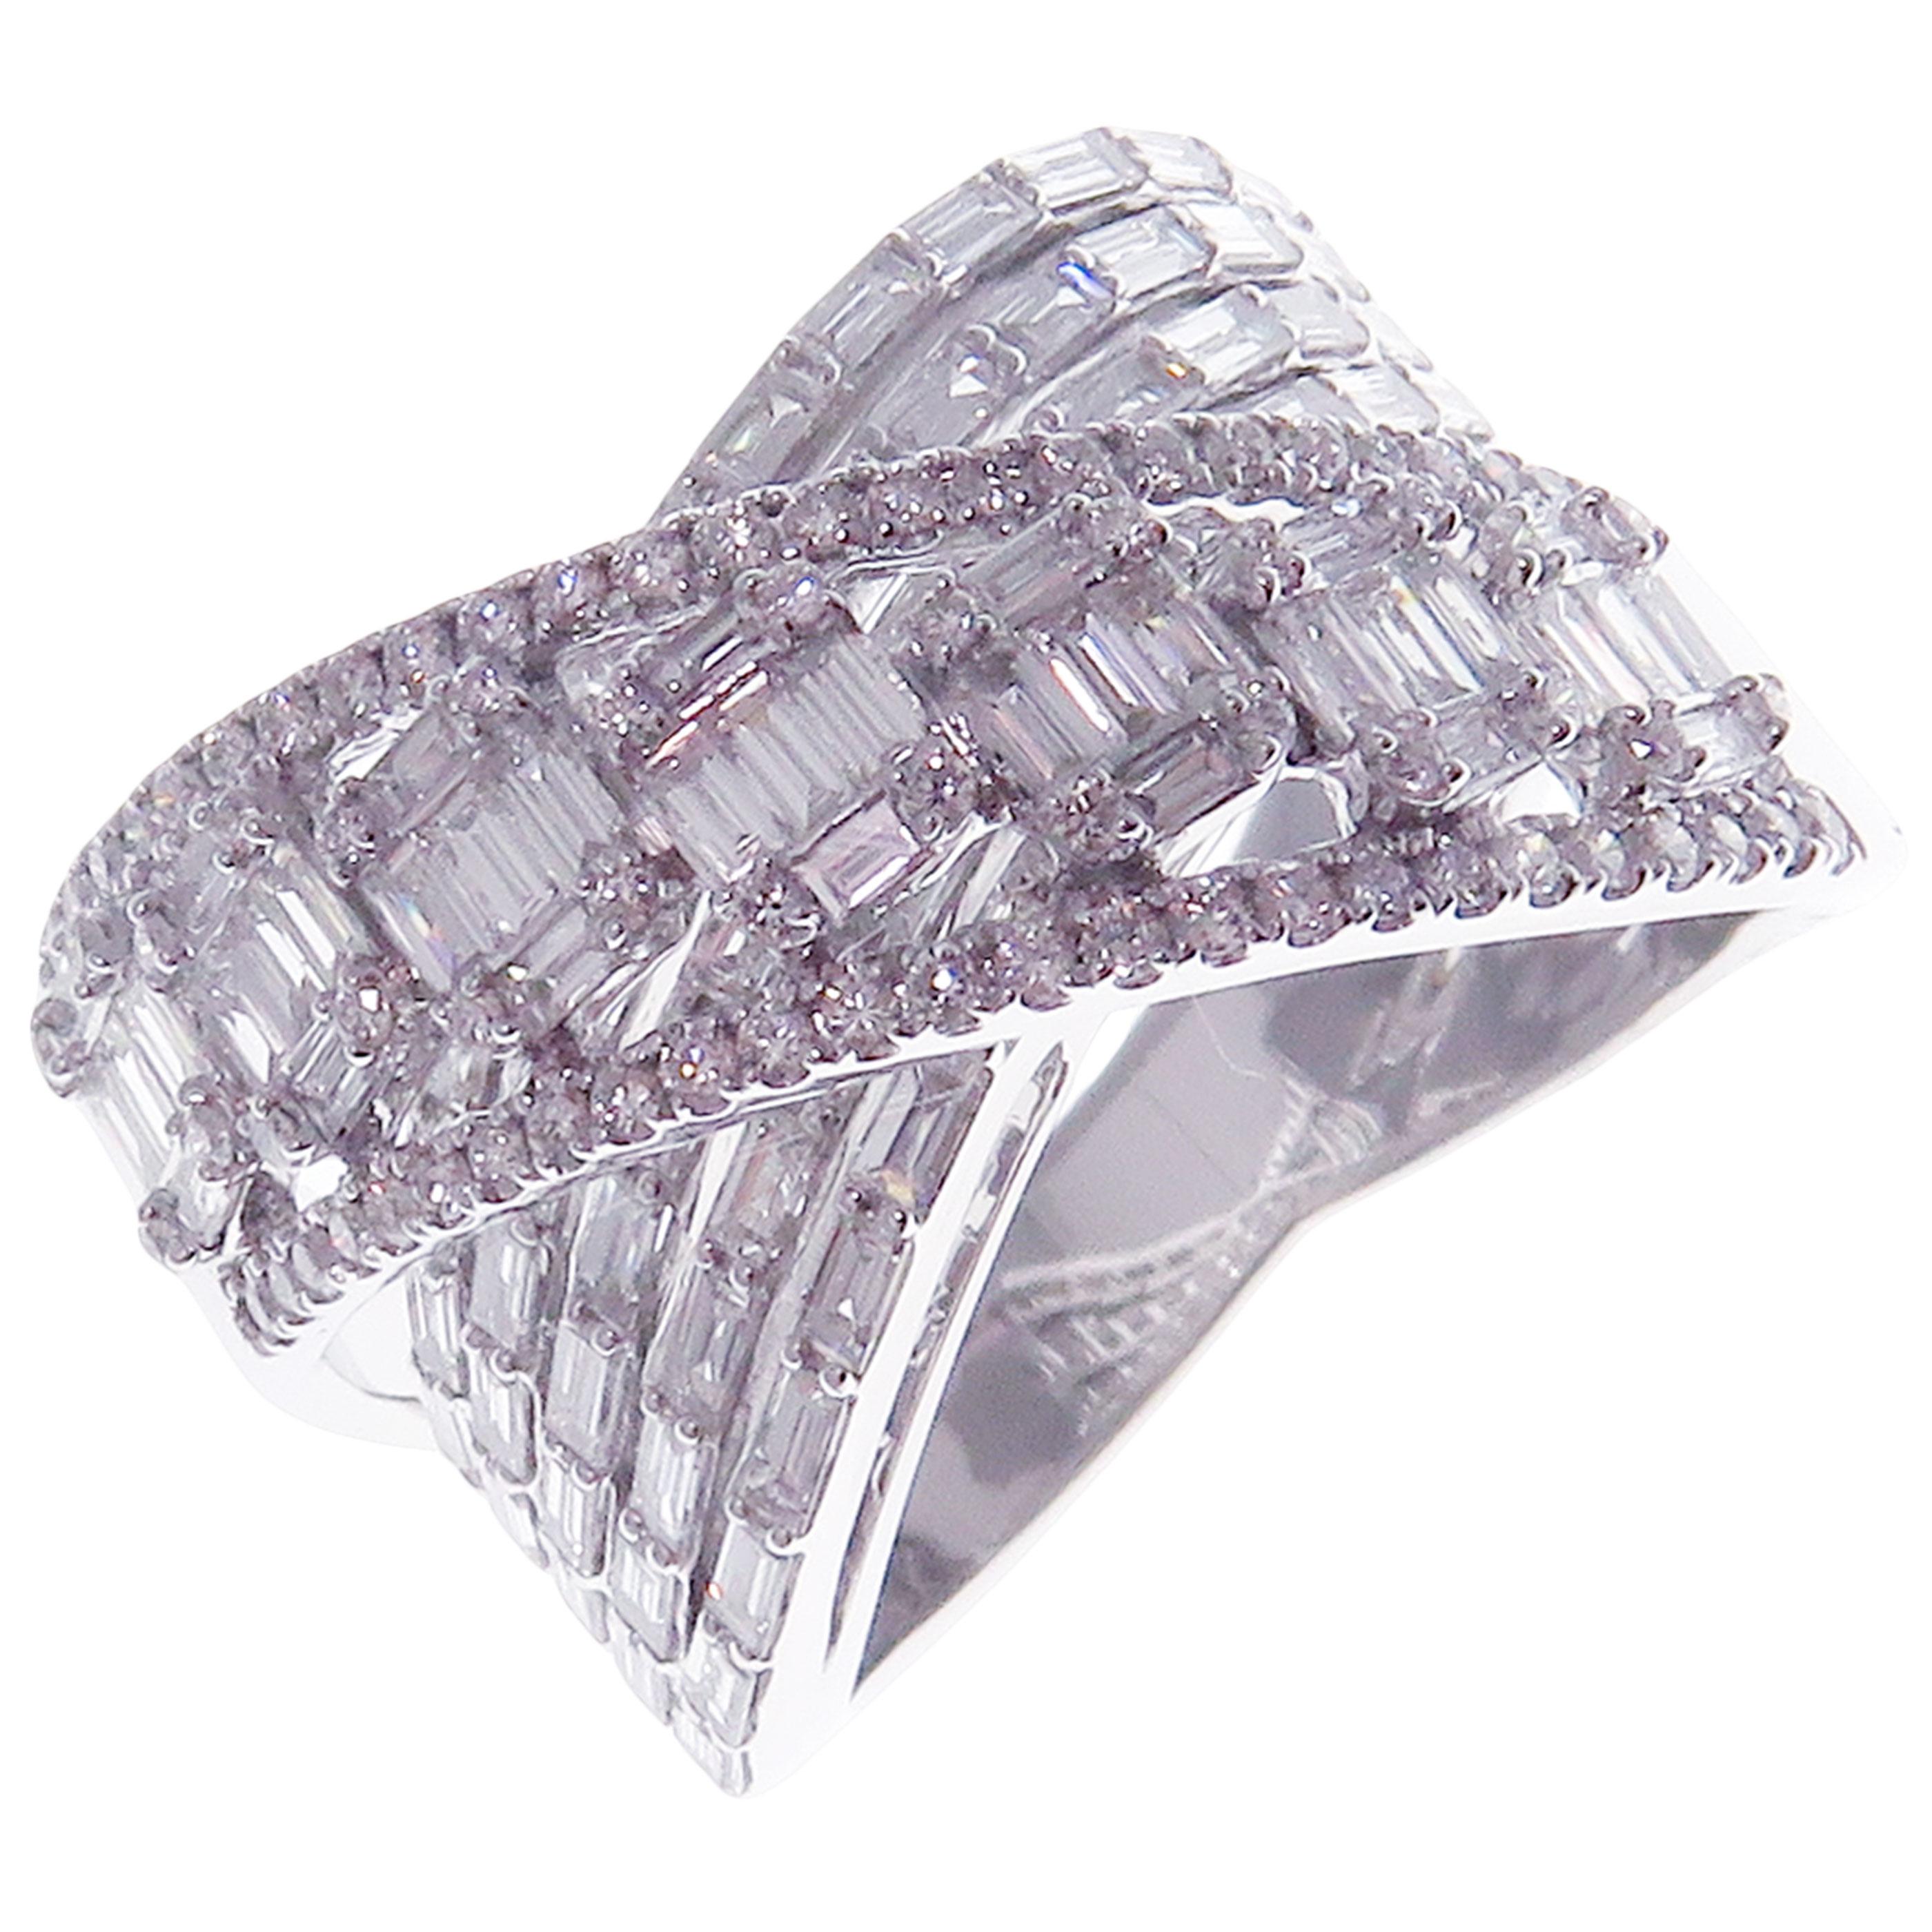 This diamond criss-cross illusion ring is crafted in 18-karat white gold, featuring 76 round white diamonds totaling of 0.34 carats and 100 baguette white diamonds totaling of 1.64 carats.
Approximate total weight 12.97 grams.
Standard Ring size